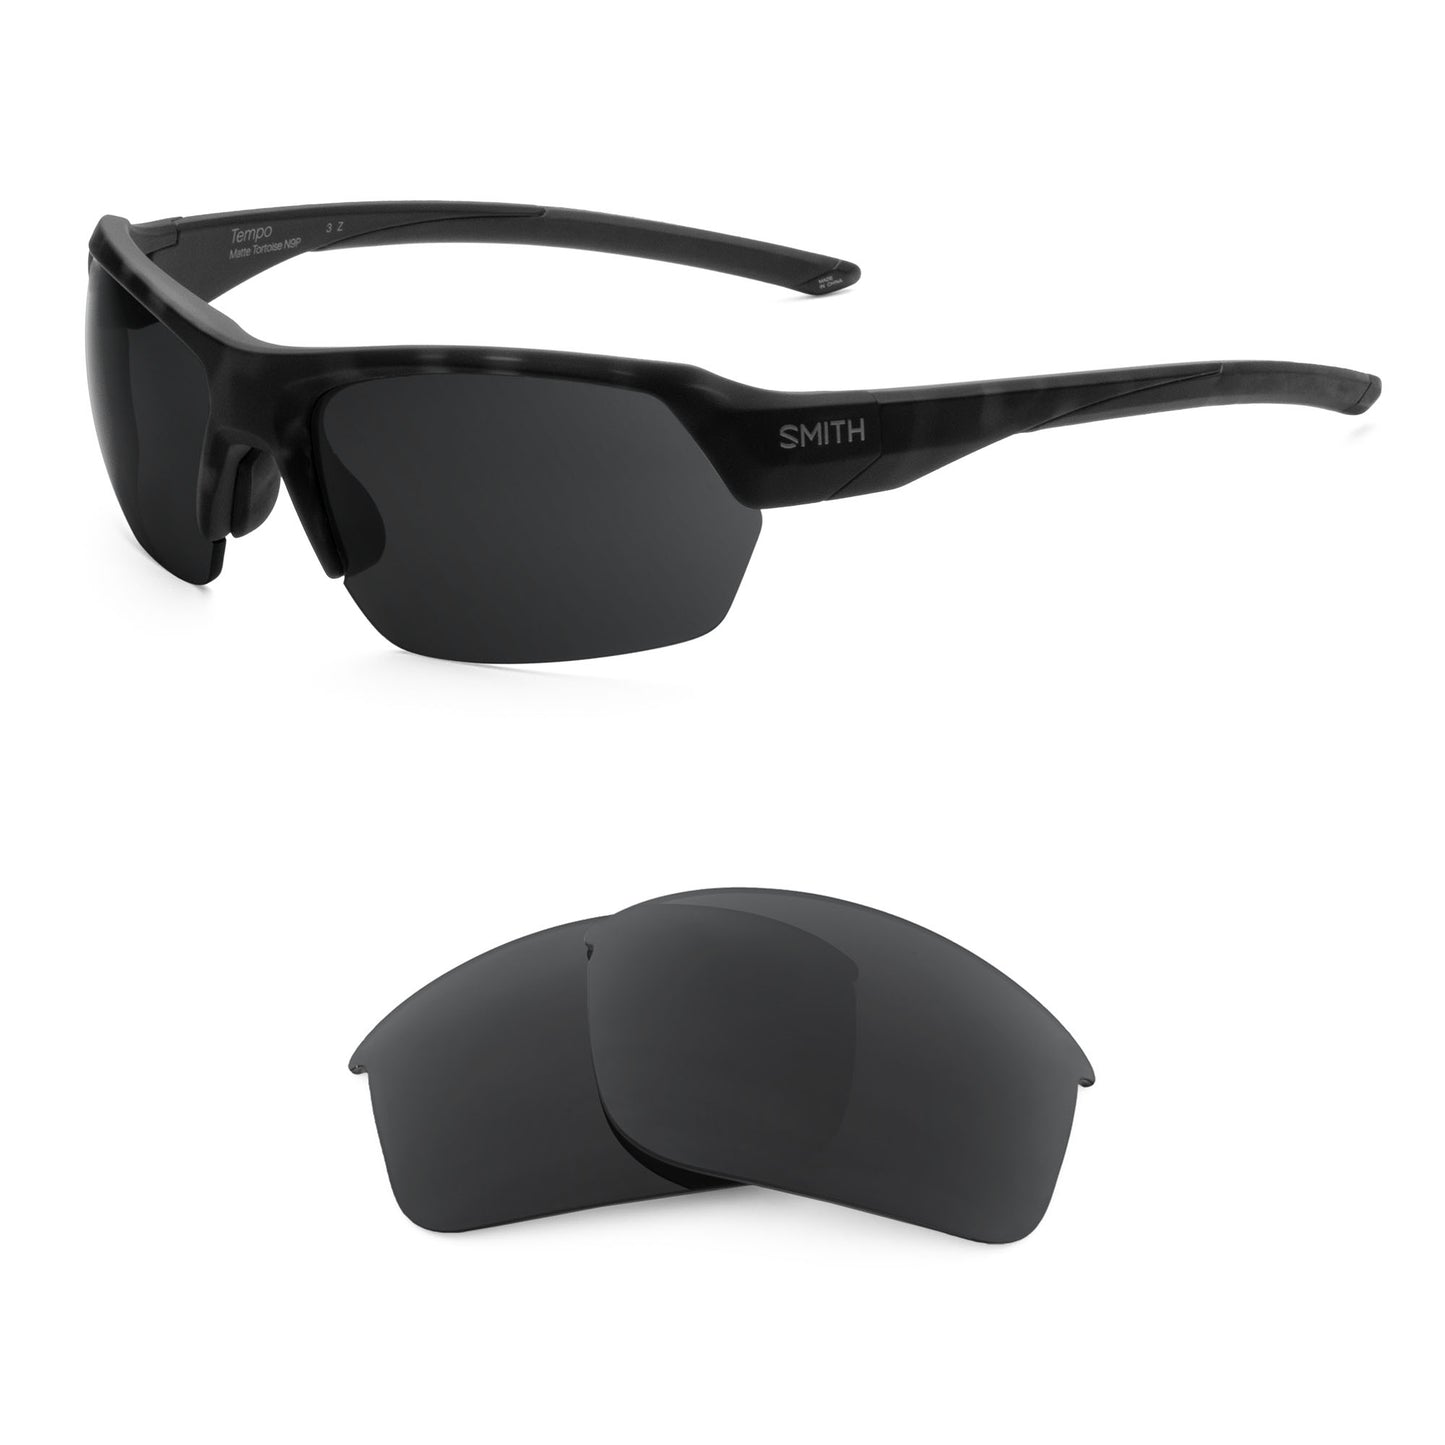 Smith Tempo sunglasses with replacement lenses